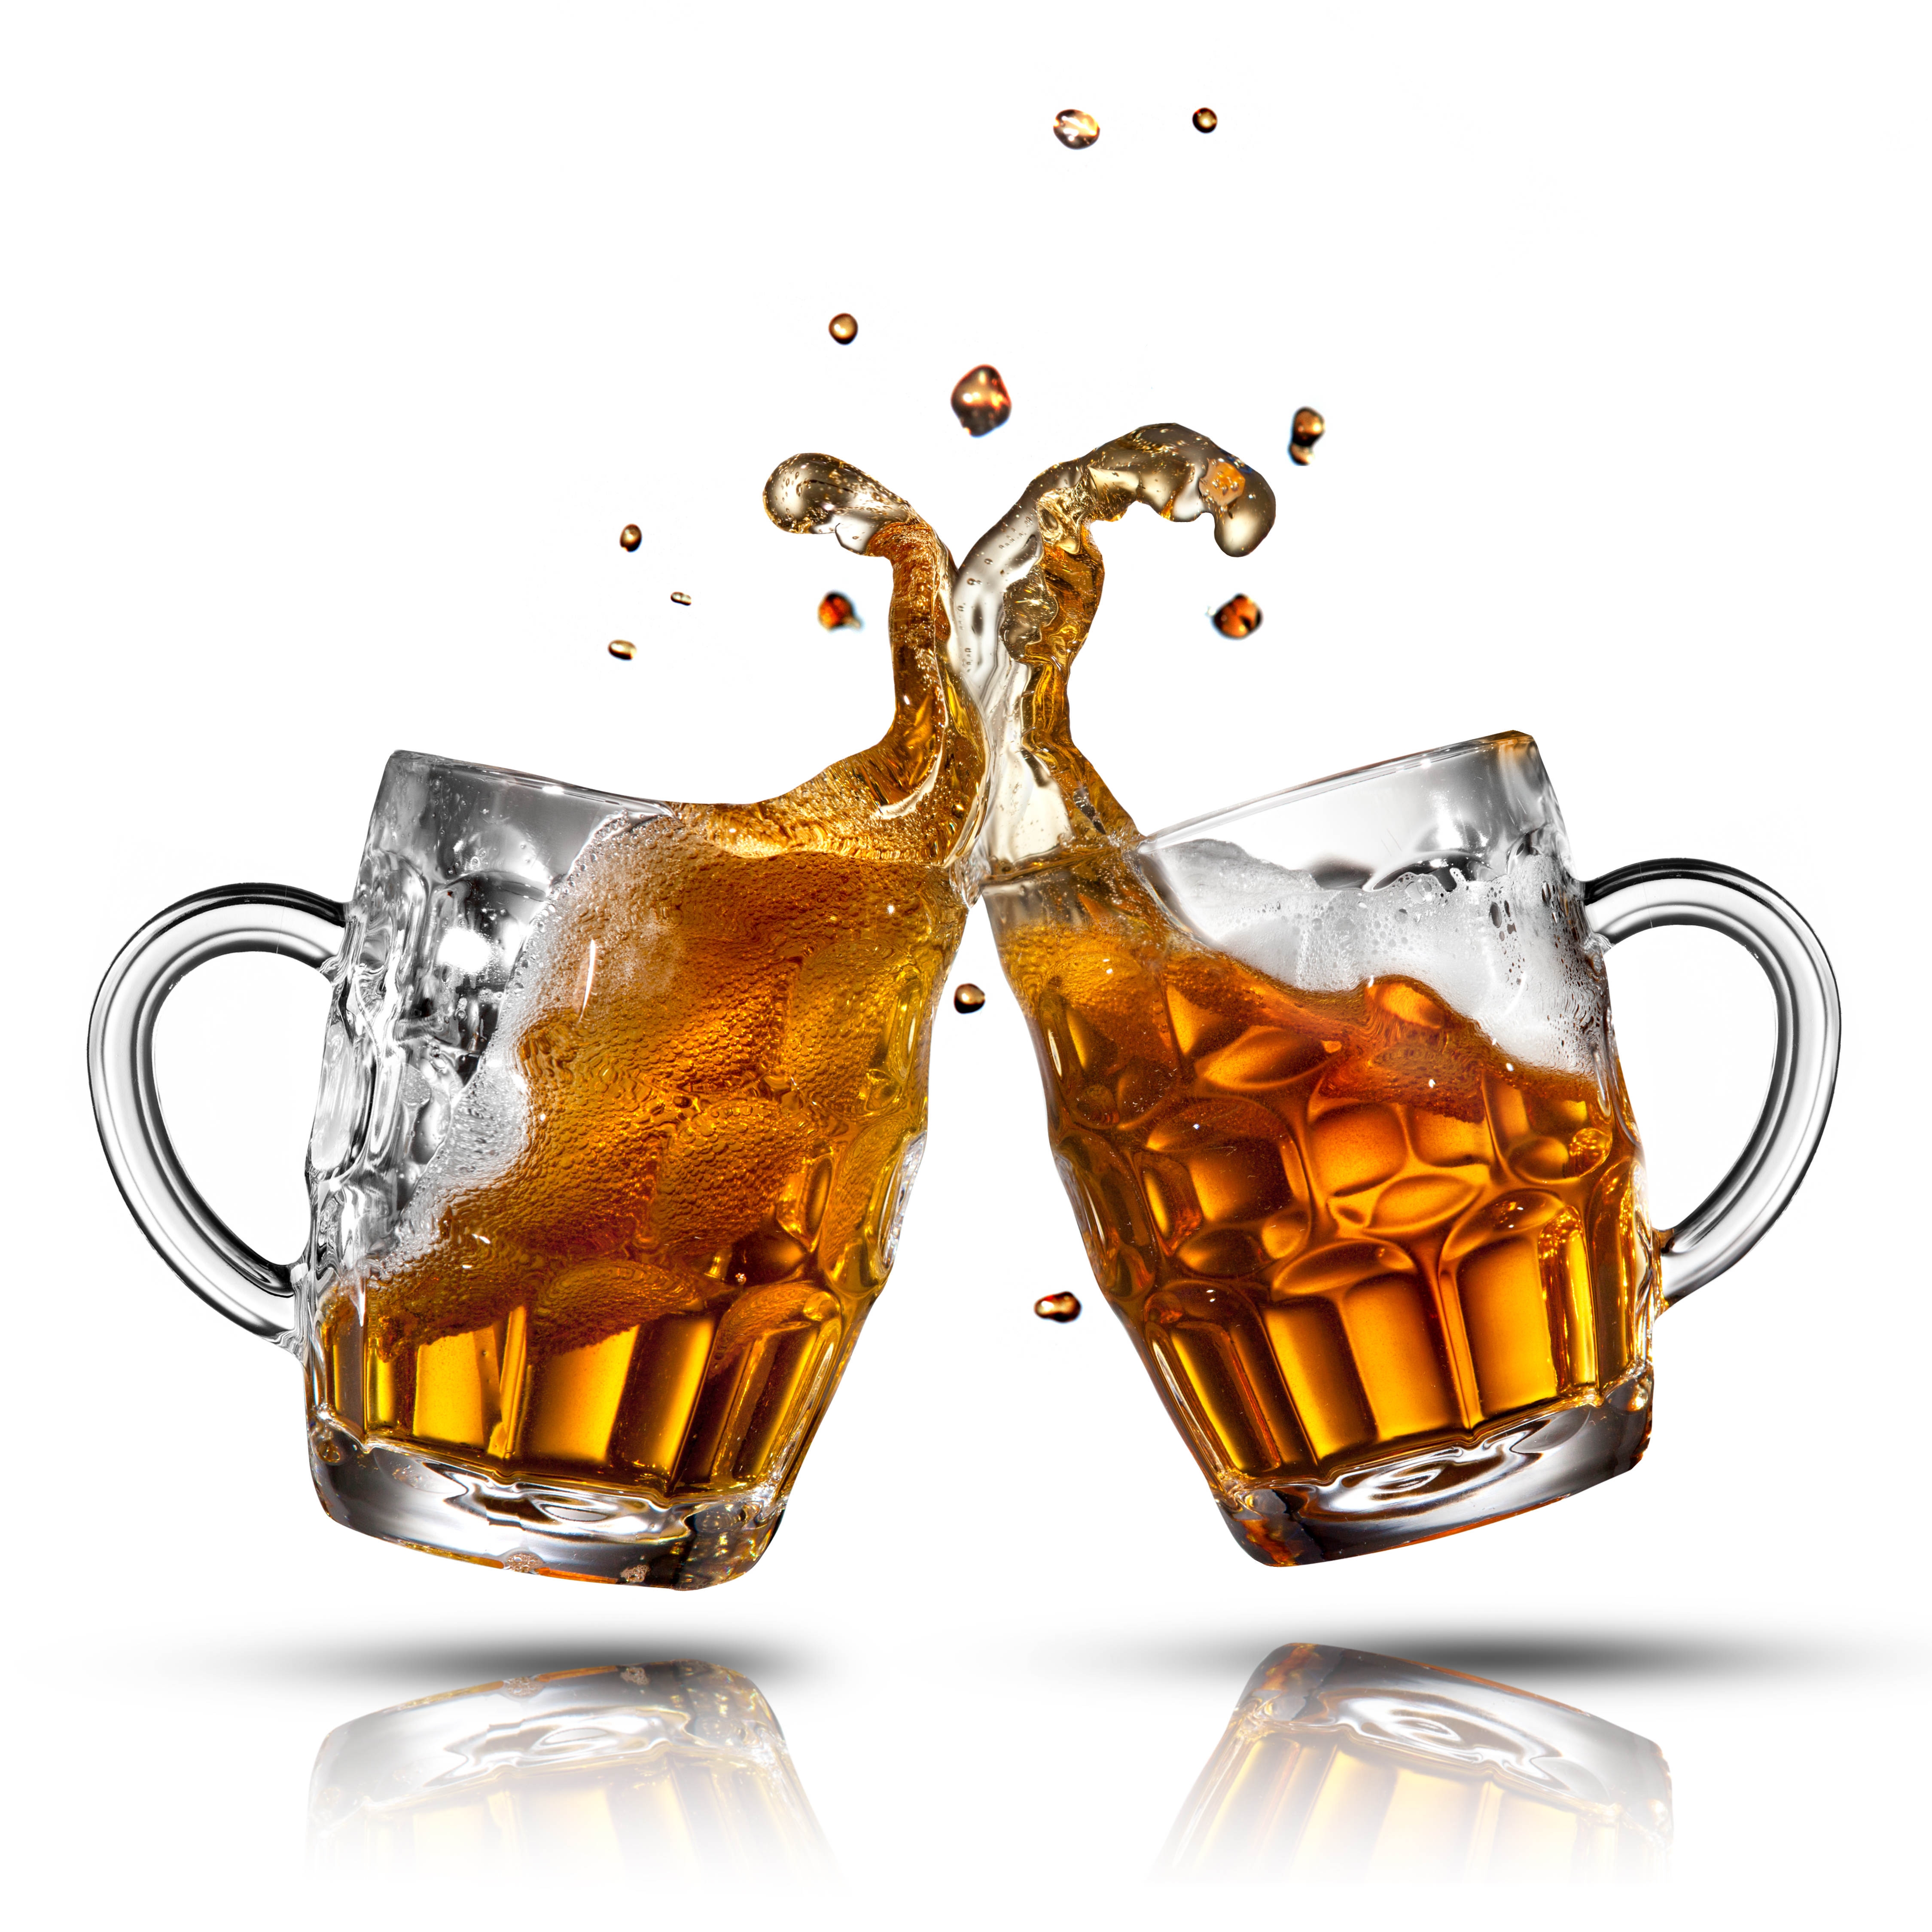 Wallpaper White Background Drink Mugs Couple Whisky Amber